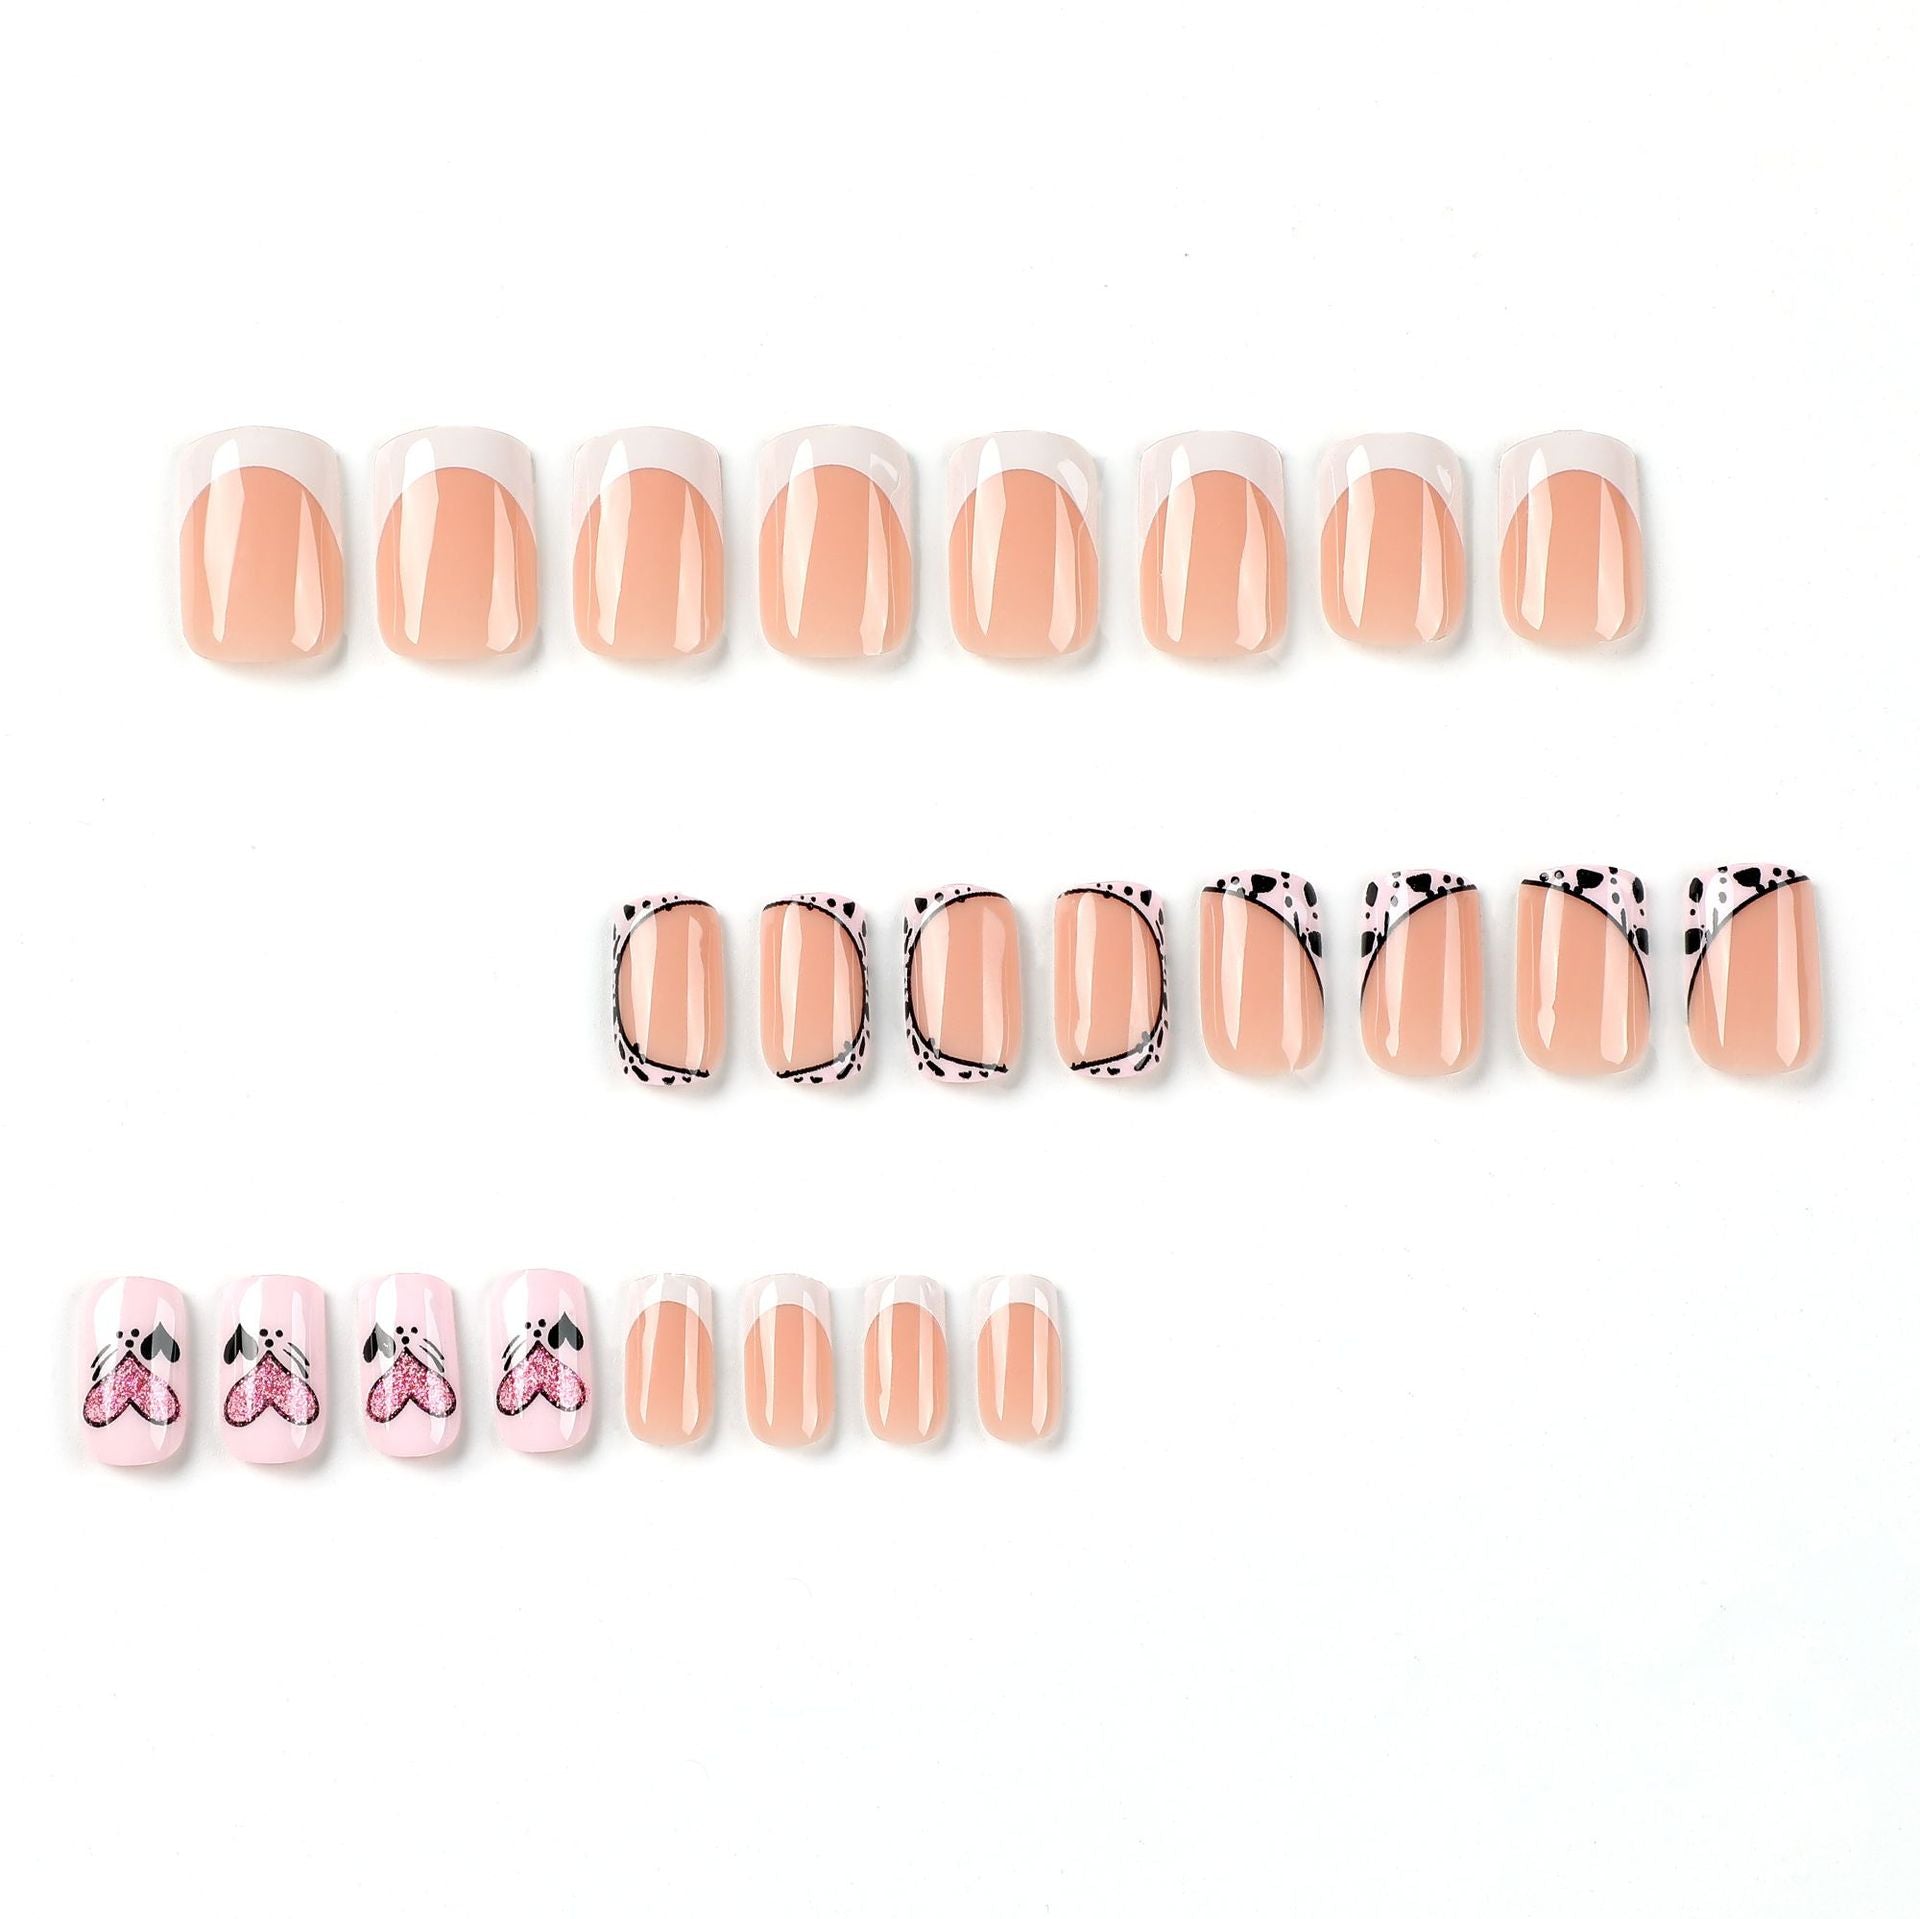 Sweetheart Square Shape Press On Nails - Galspro